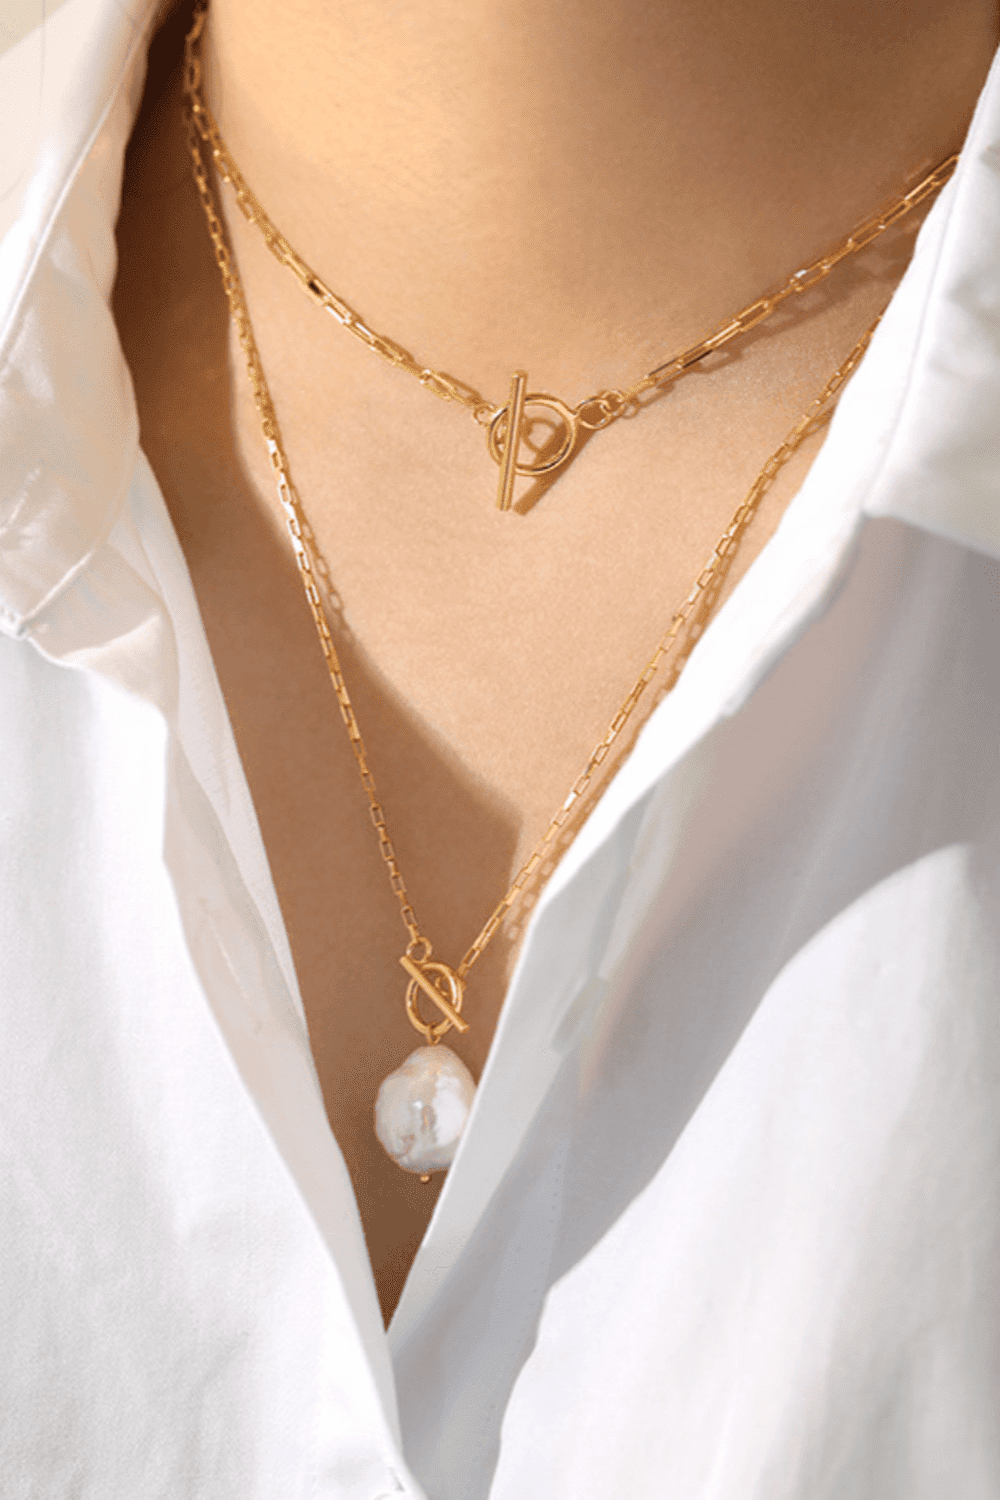 Fancy Anchor Chain Necklace